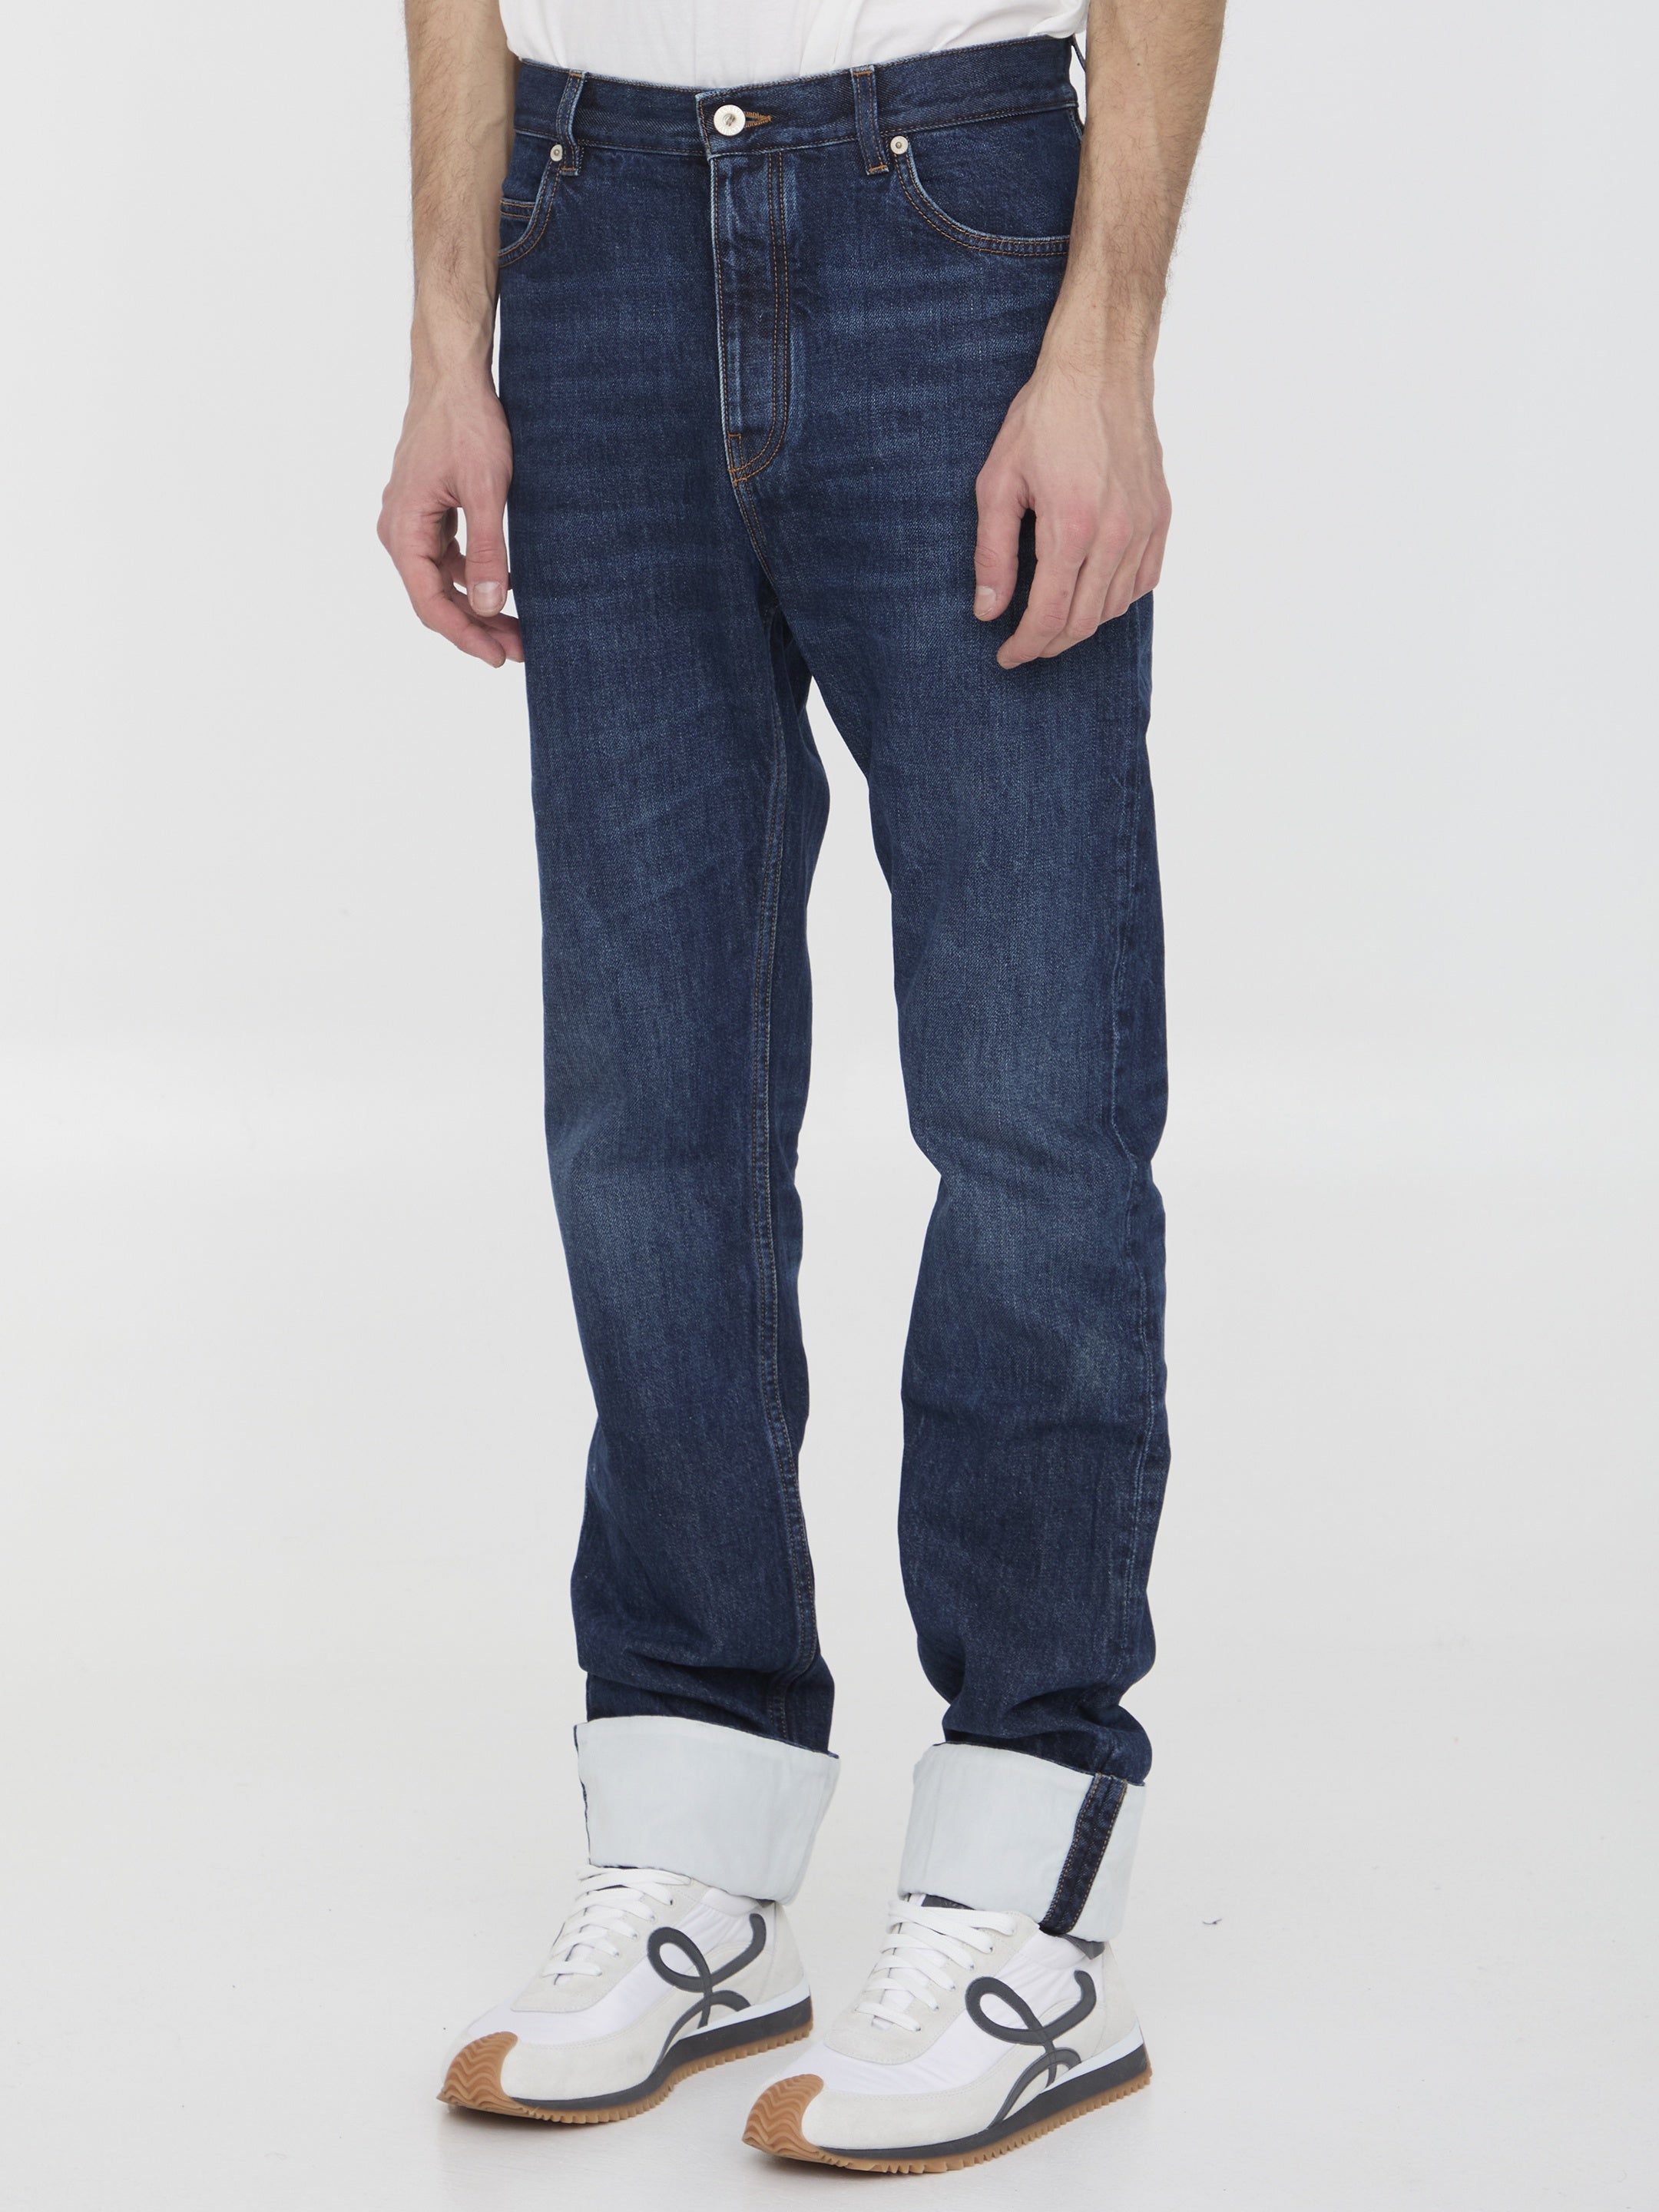 LOEWE-OUTLET-SALE-Fisherman-turn-up-jeans-Jeans-ARCHIVE-COLLECTION-2.jpg